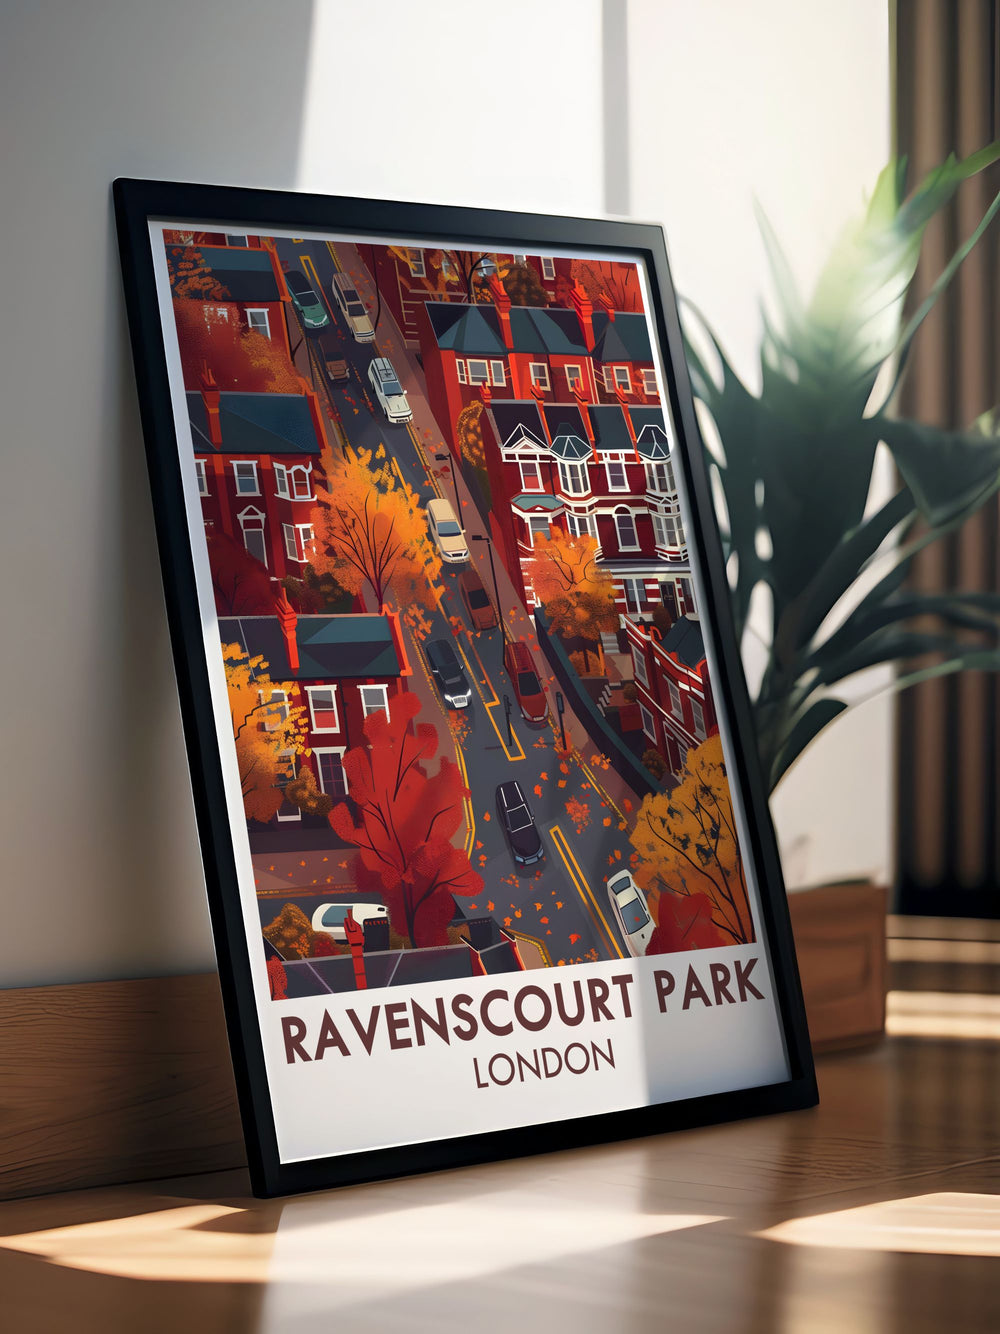 Vintage Travel Print of Ravenscourt Park Residentials featuring the tranquil park setting and iconic London Baobab Tree. Perfect for home decor, this print combines historical charm with natural beauty, creating a captivating scene for any room.